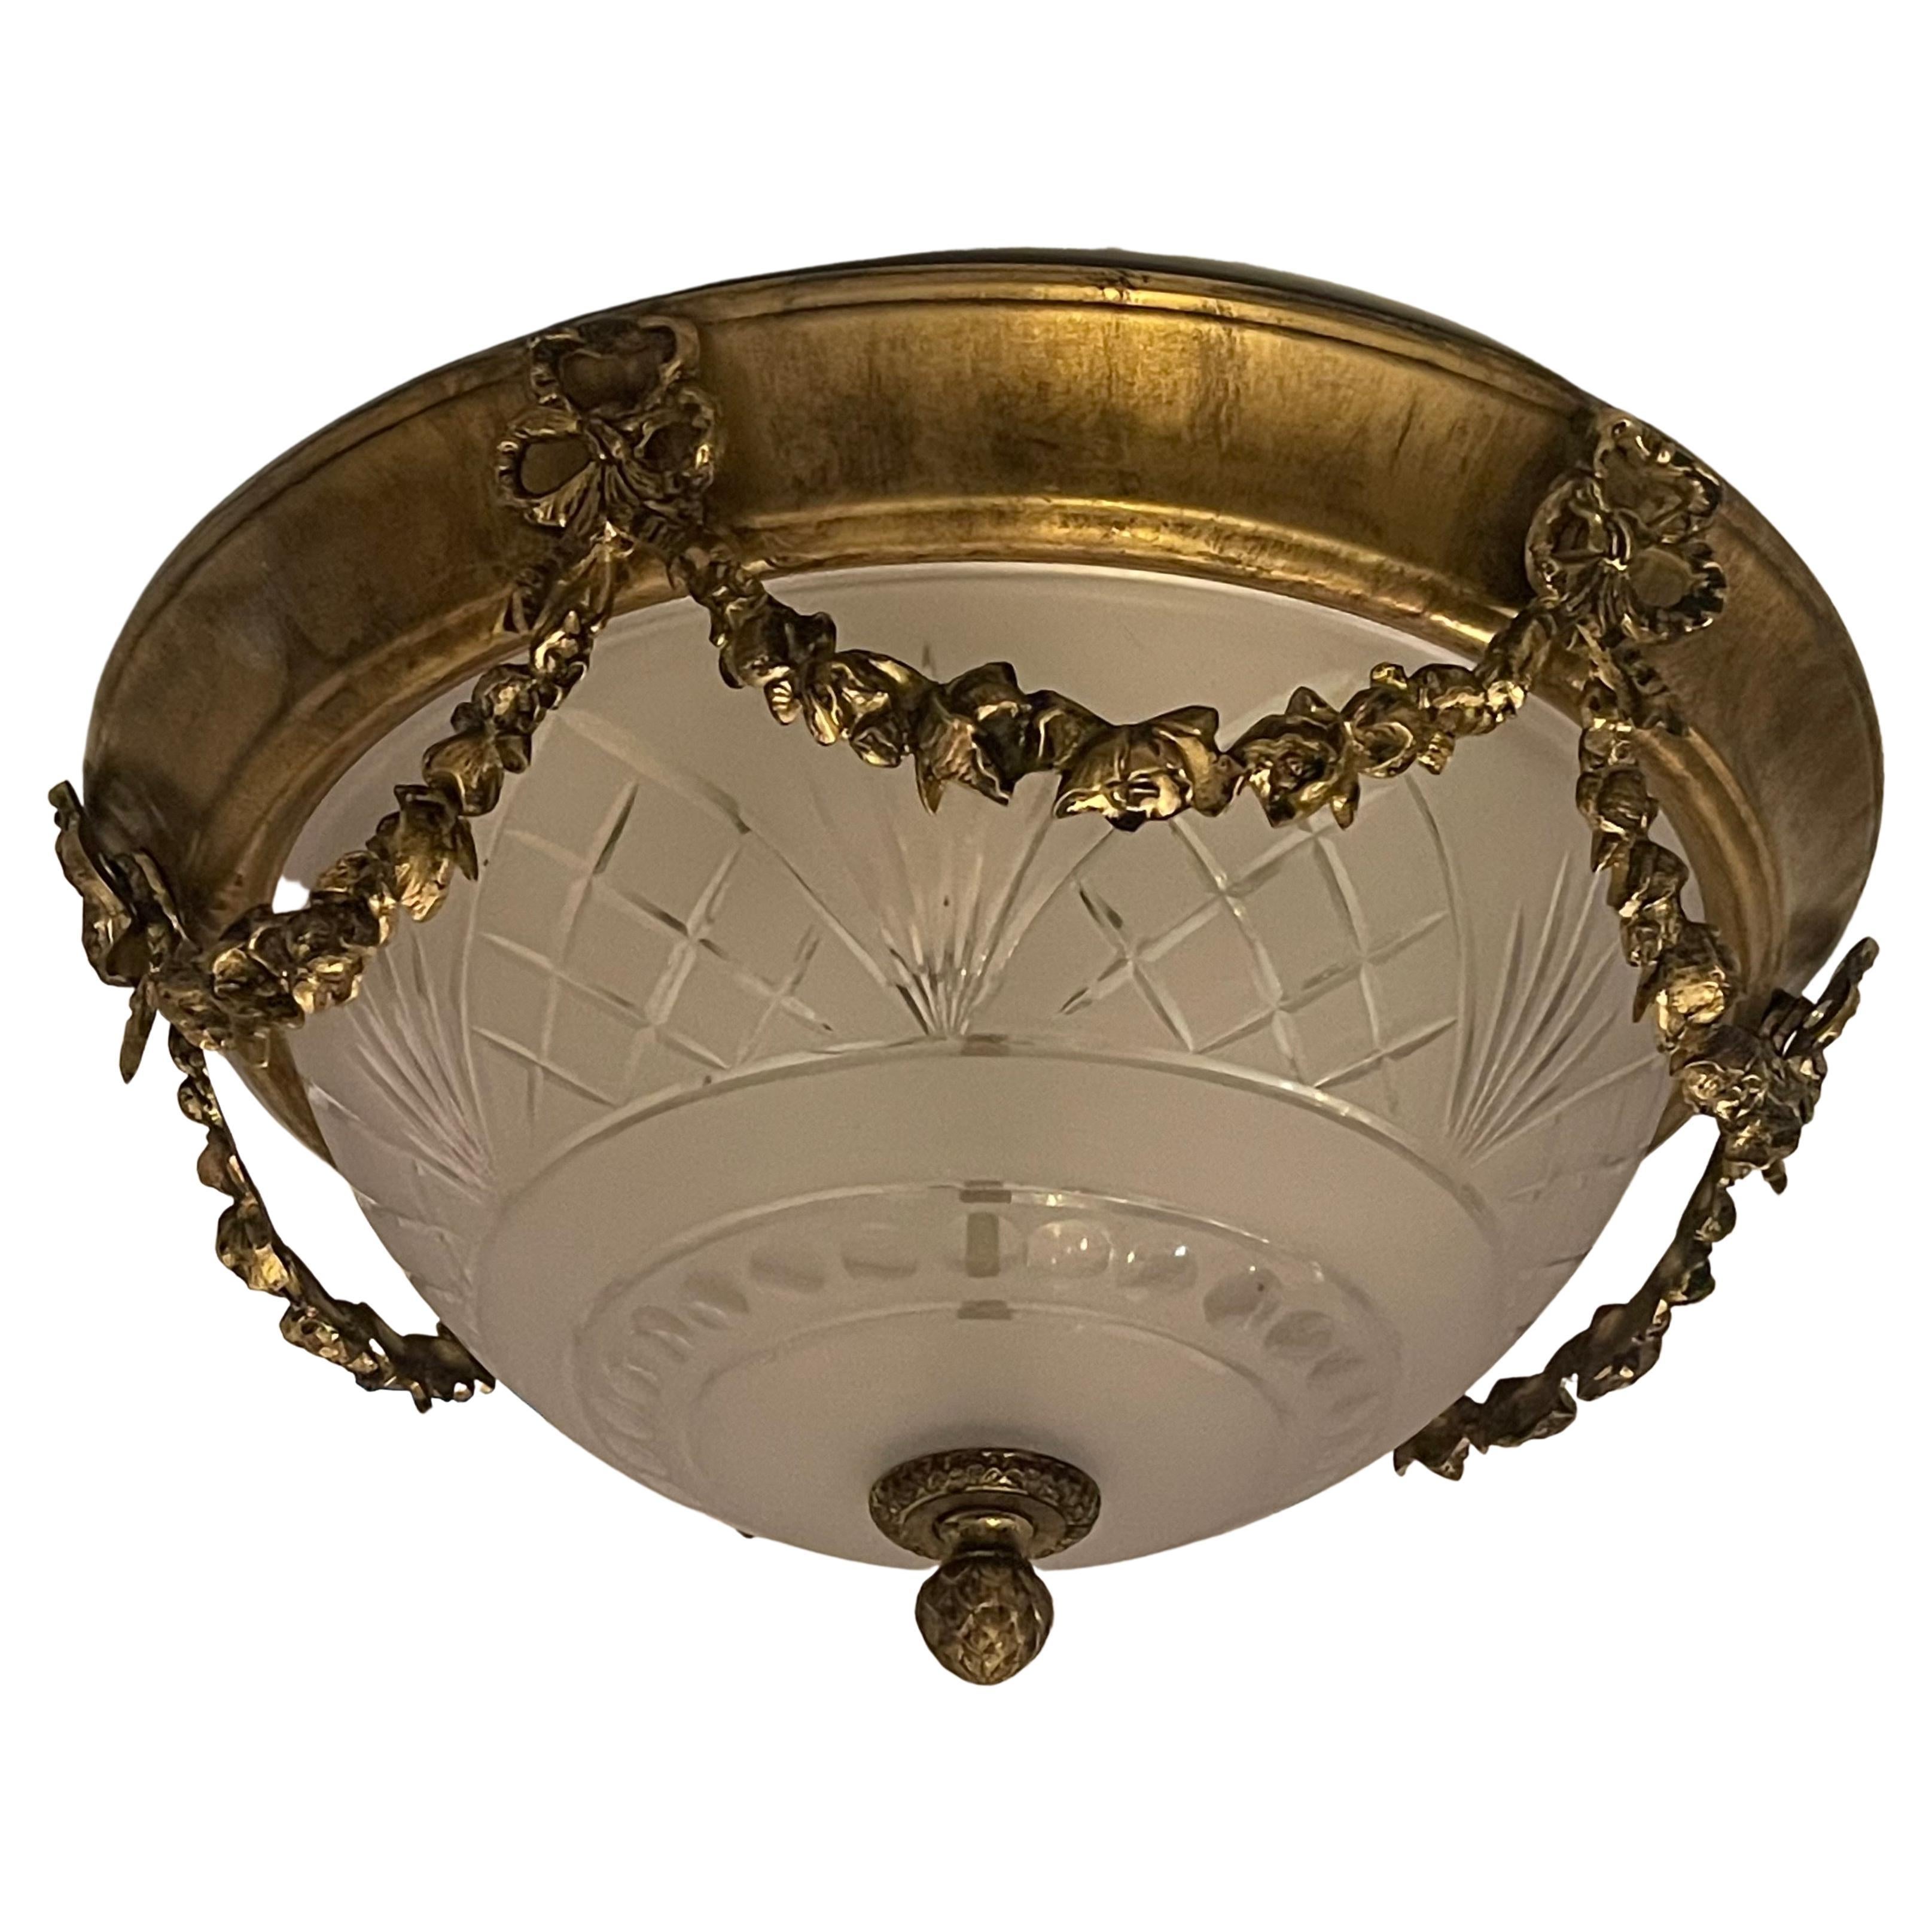 A wonderful pair of vintage French style gold gilt and etched frosted glass ormolu swag with bows and garlands flush mount ceiling fixtures, each with 2 candelabra sockets that are ready to install.